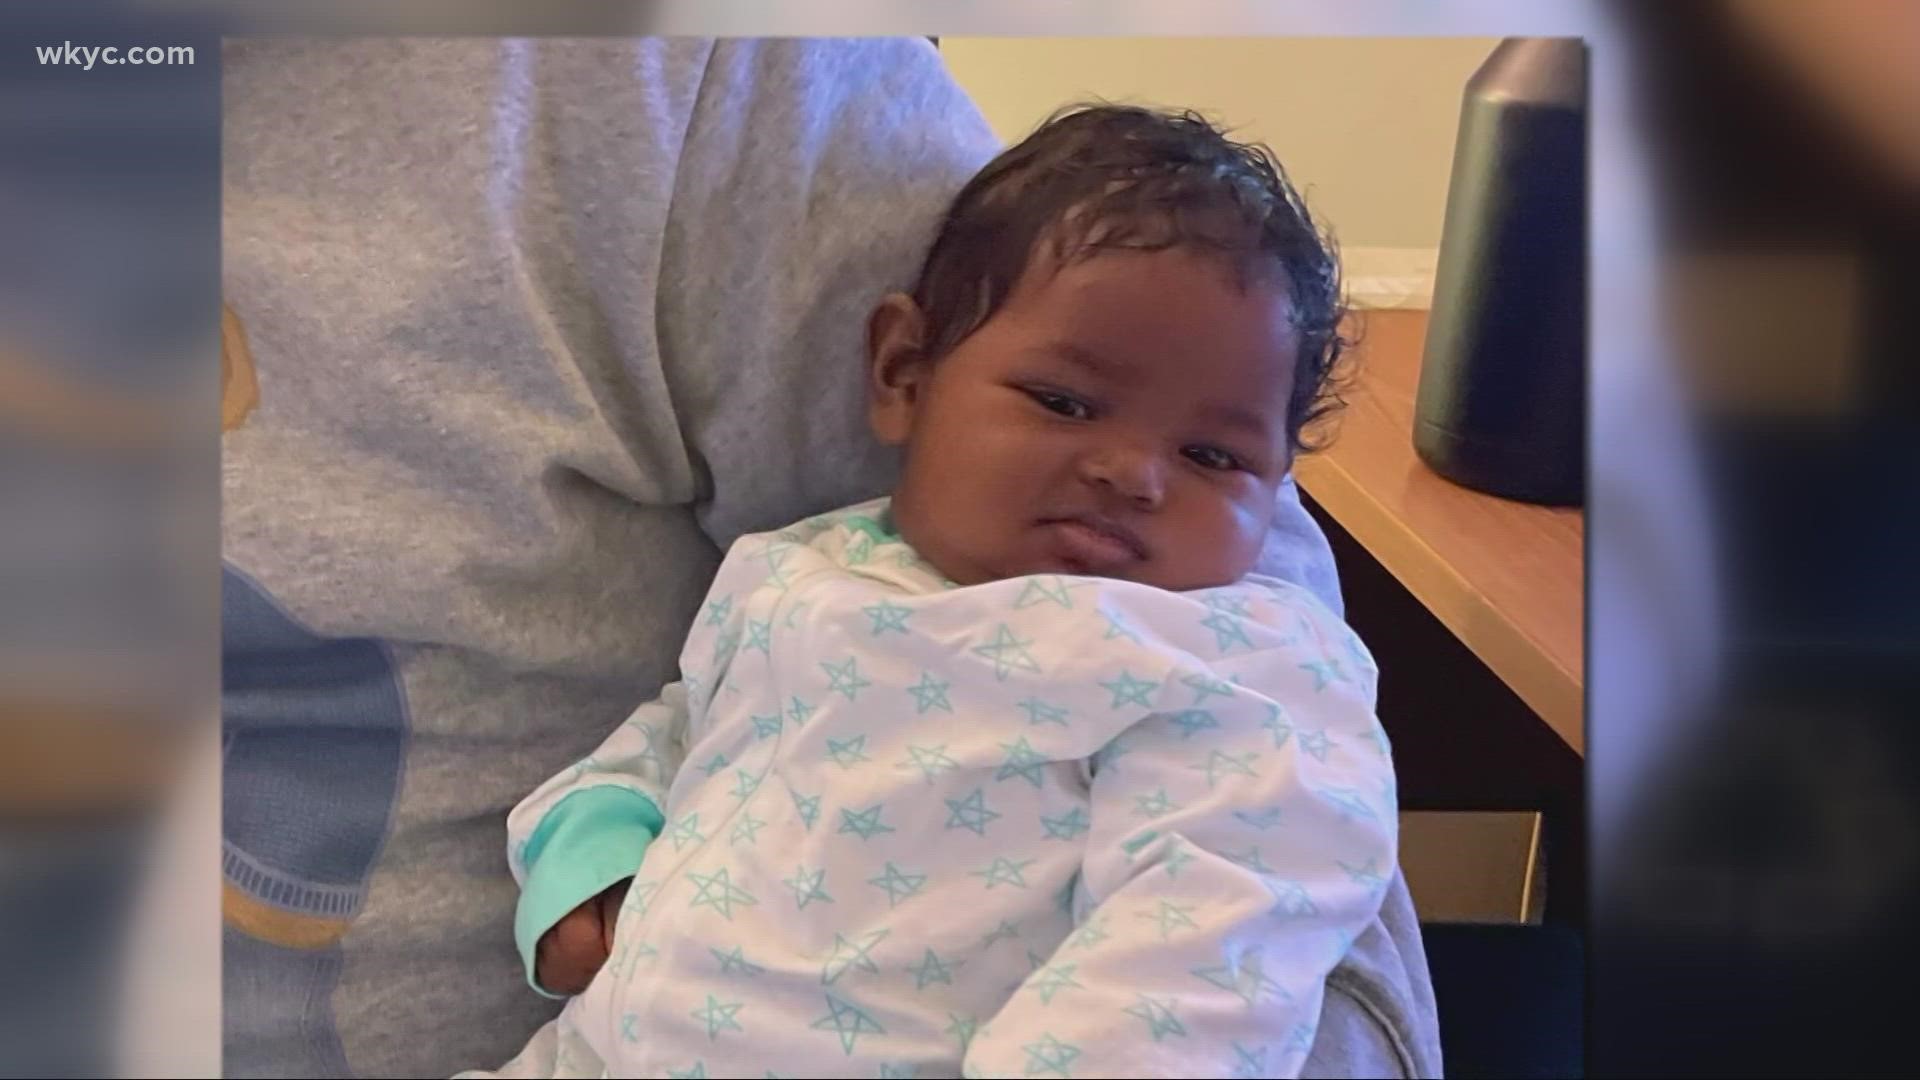 The baby girl is still with the same foster family she was placed in after police found her in July. DNA testing is helping to identify her parents.